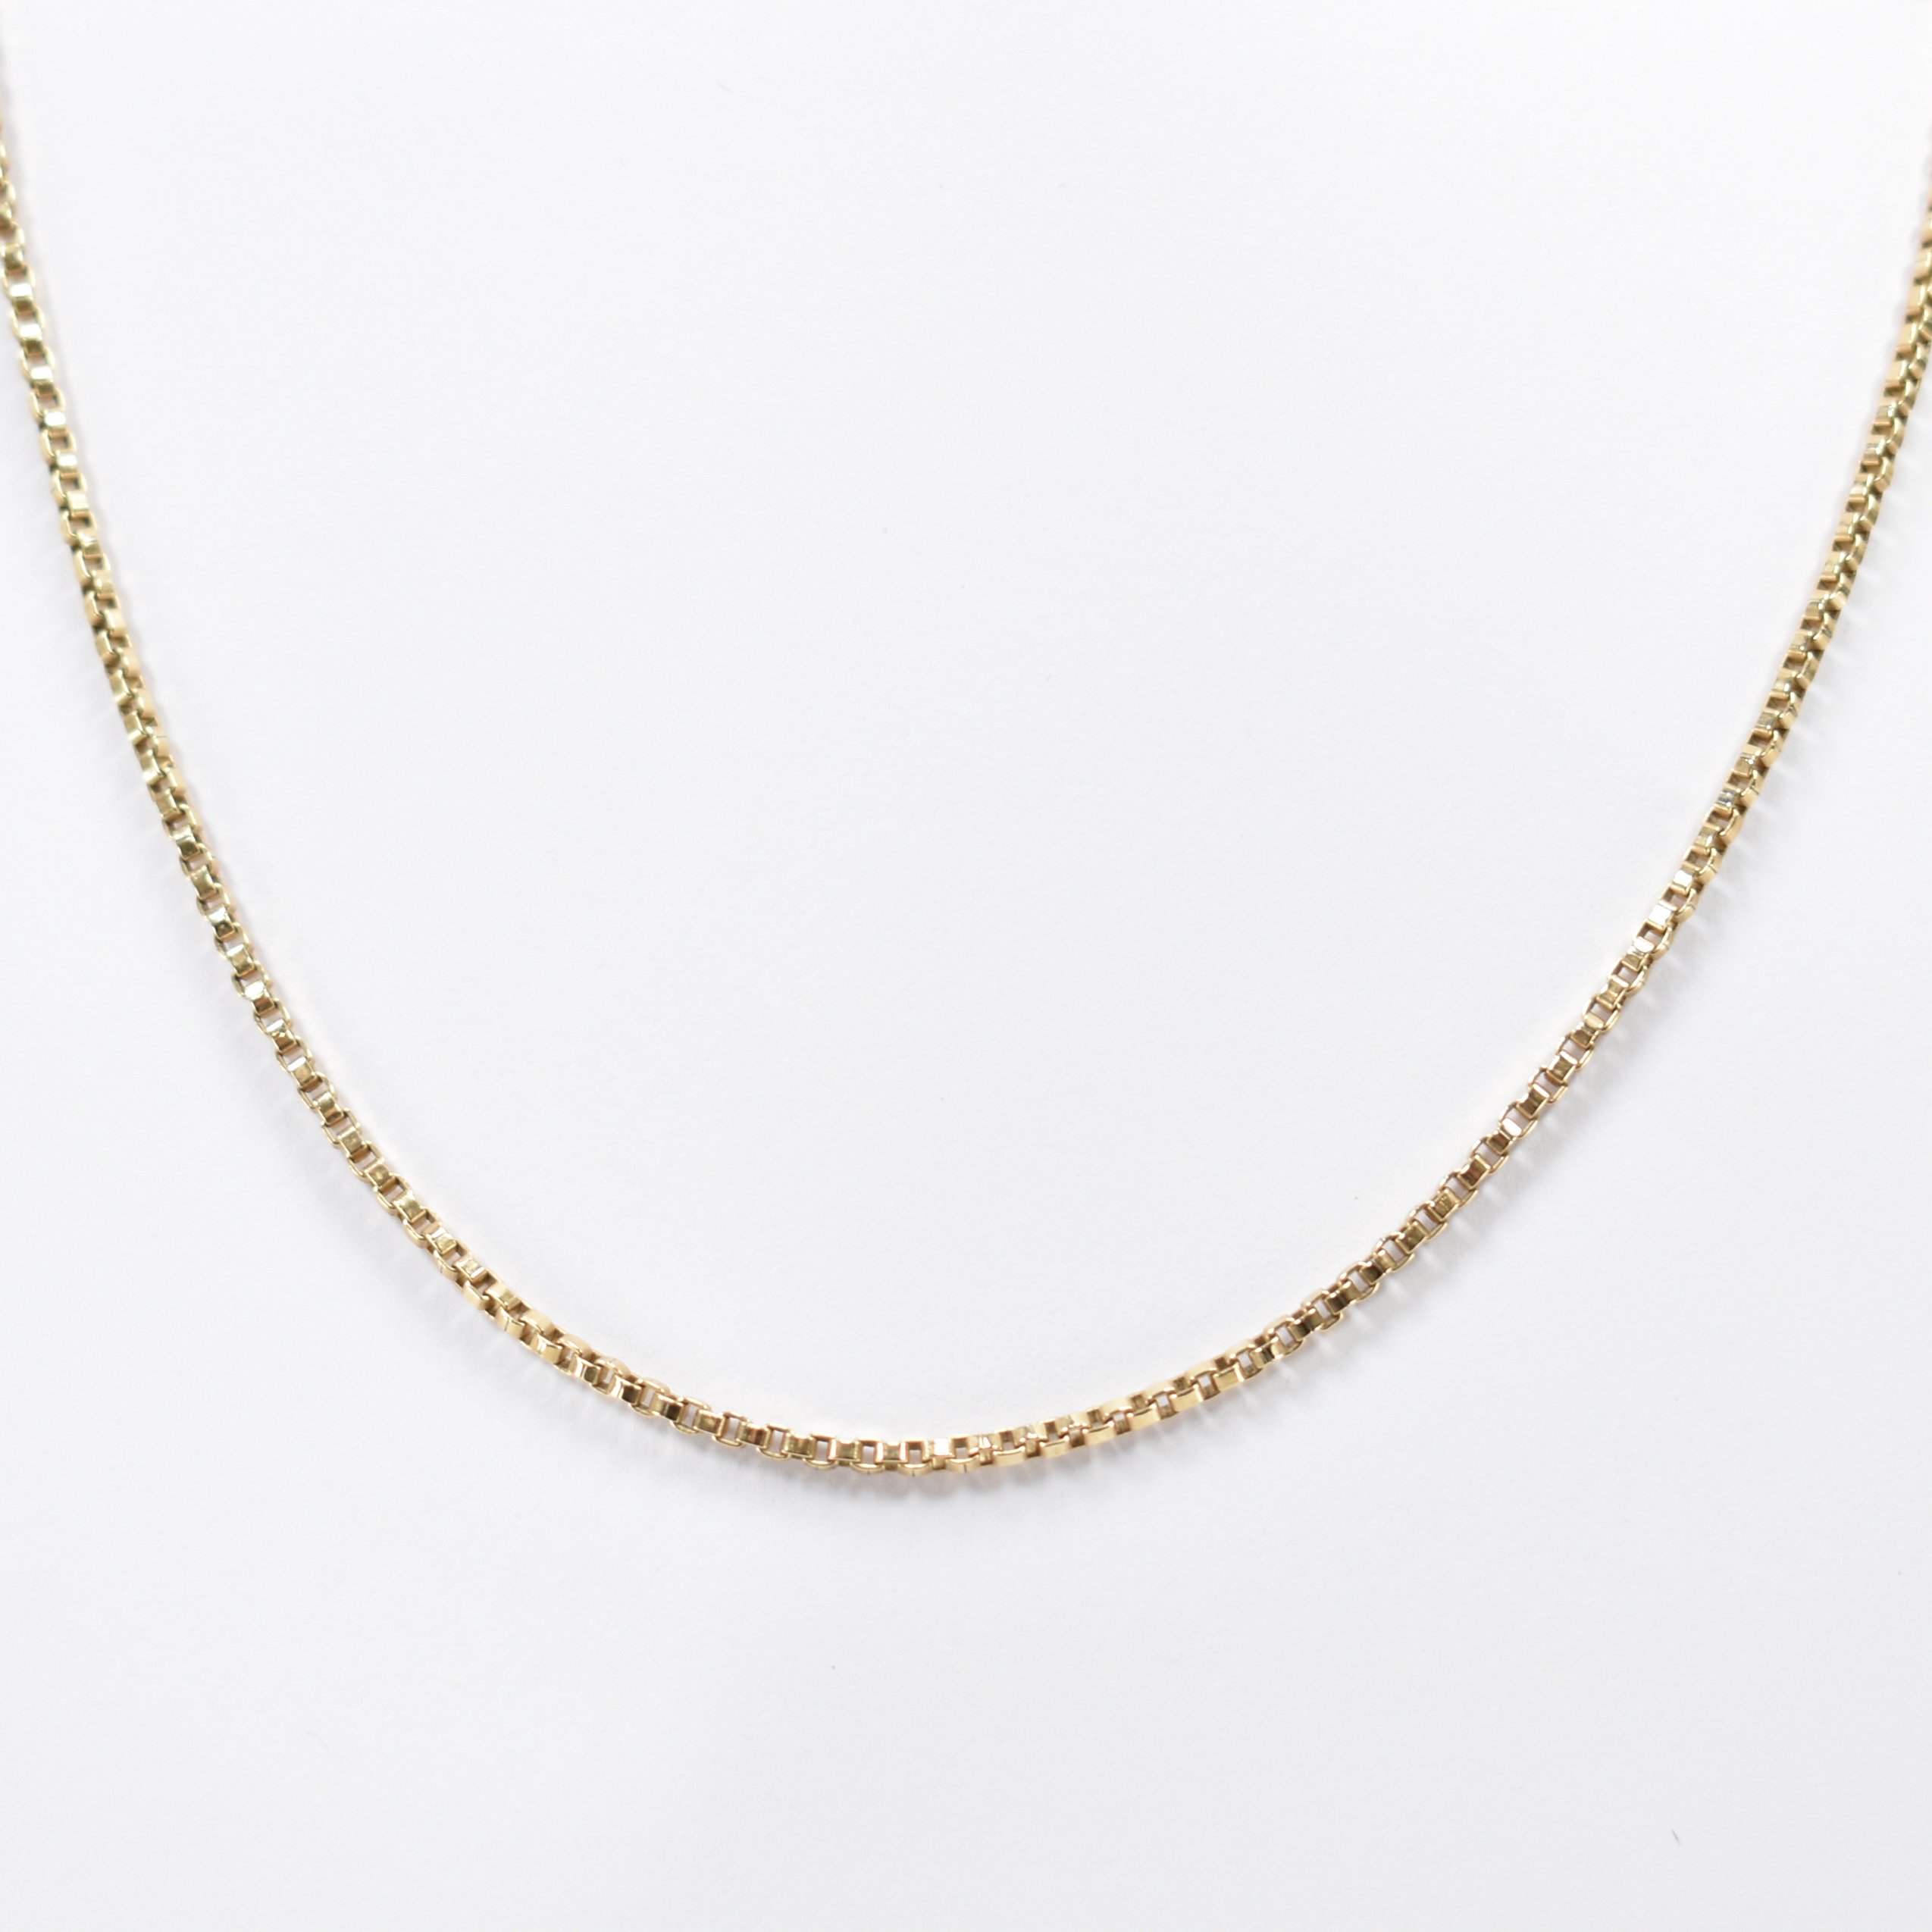 HALLMARKED 9CT BOX CHAIN NECKLACE - Image 4 of 4